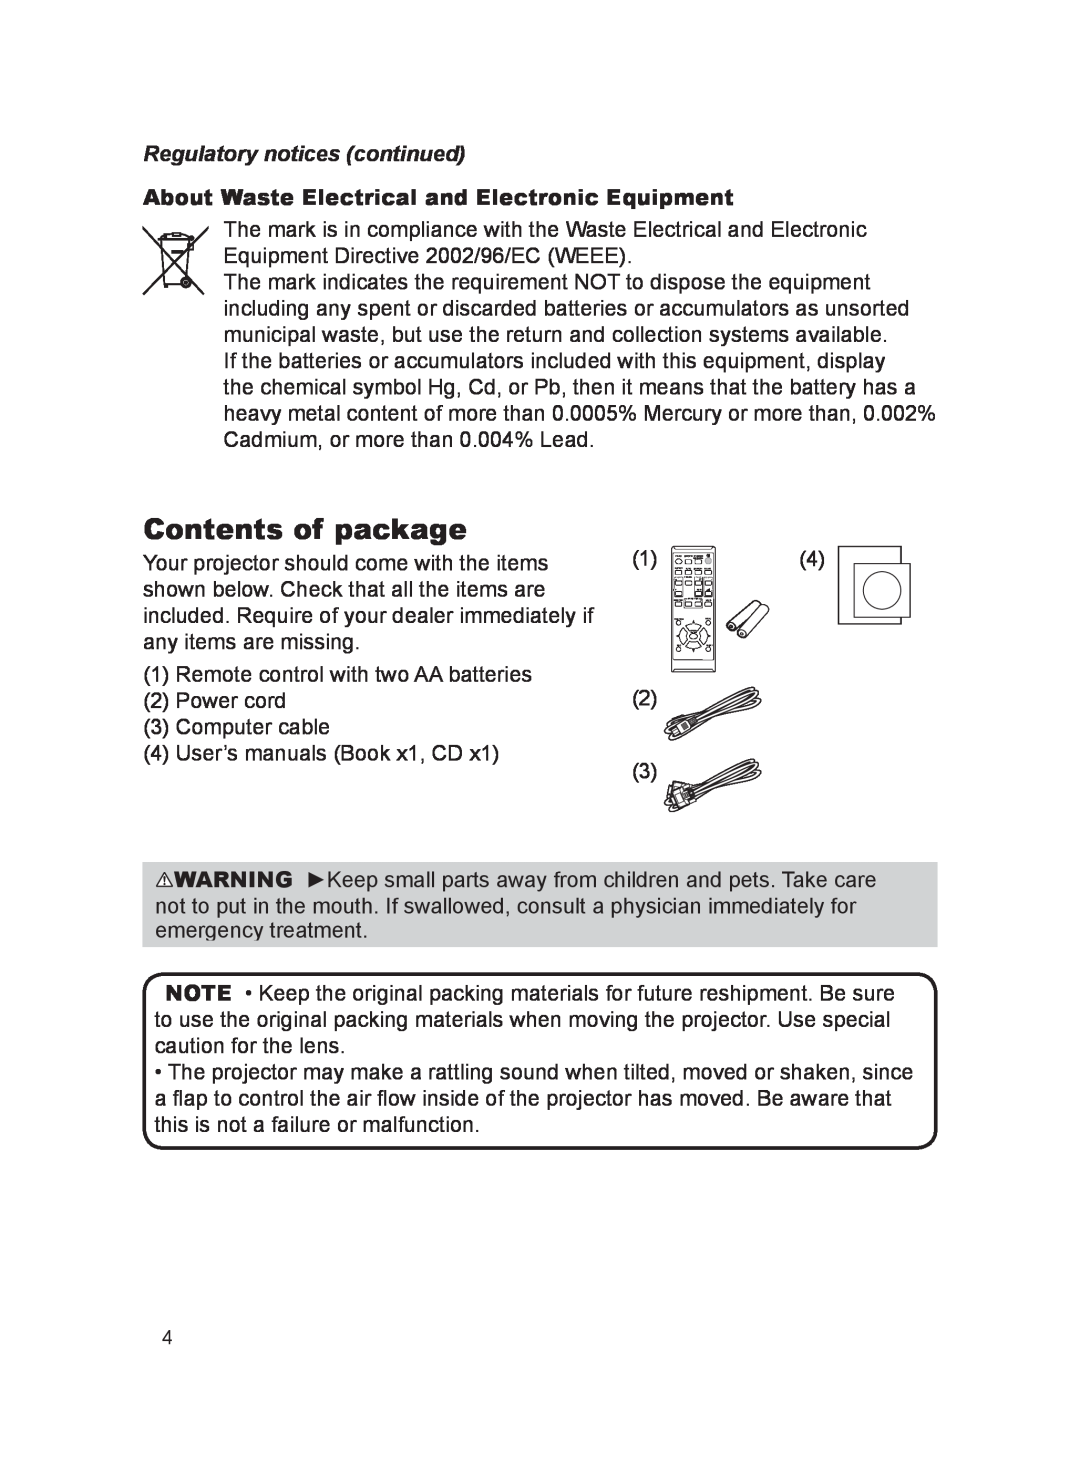 Dukane 8793h user manual Contents of package, Regulatory notices continued, About Waste Electrical and Electronic Equipment 